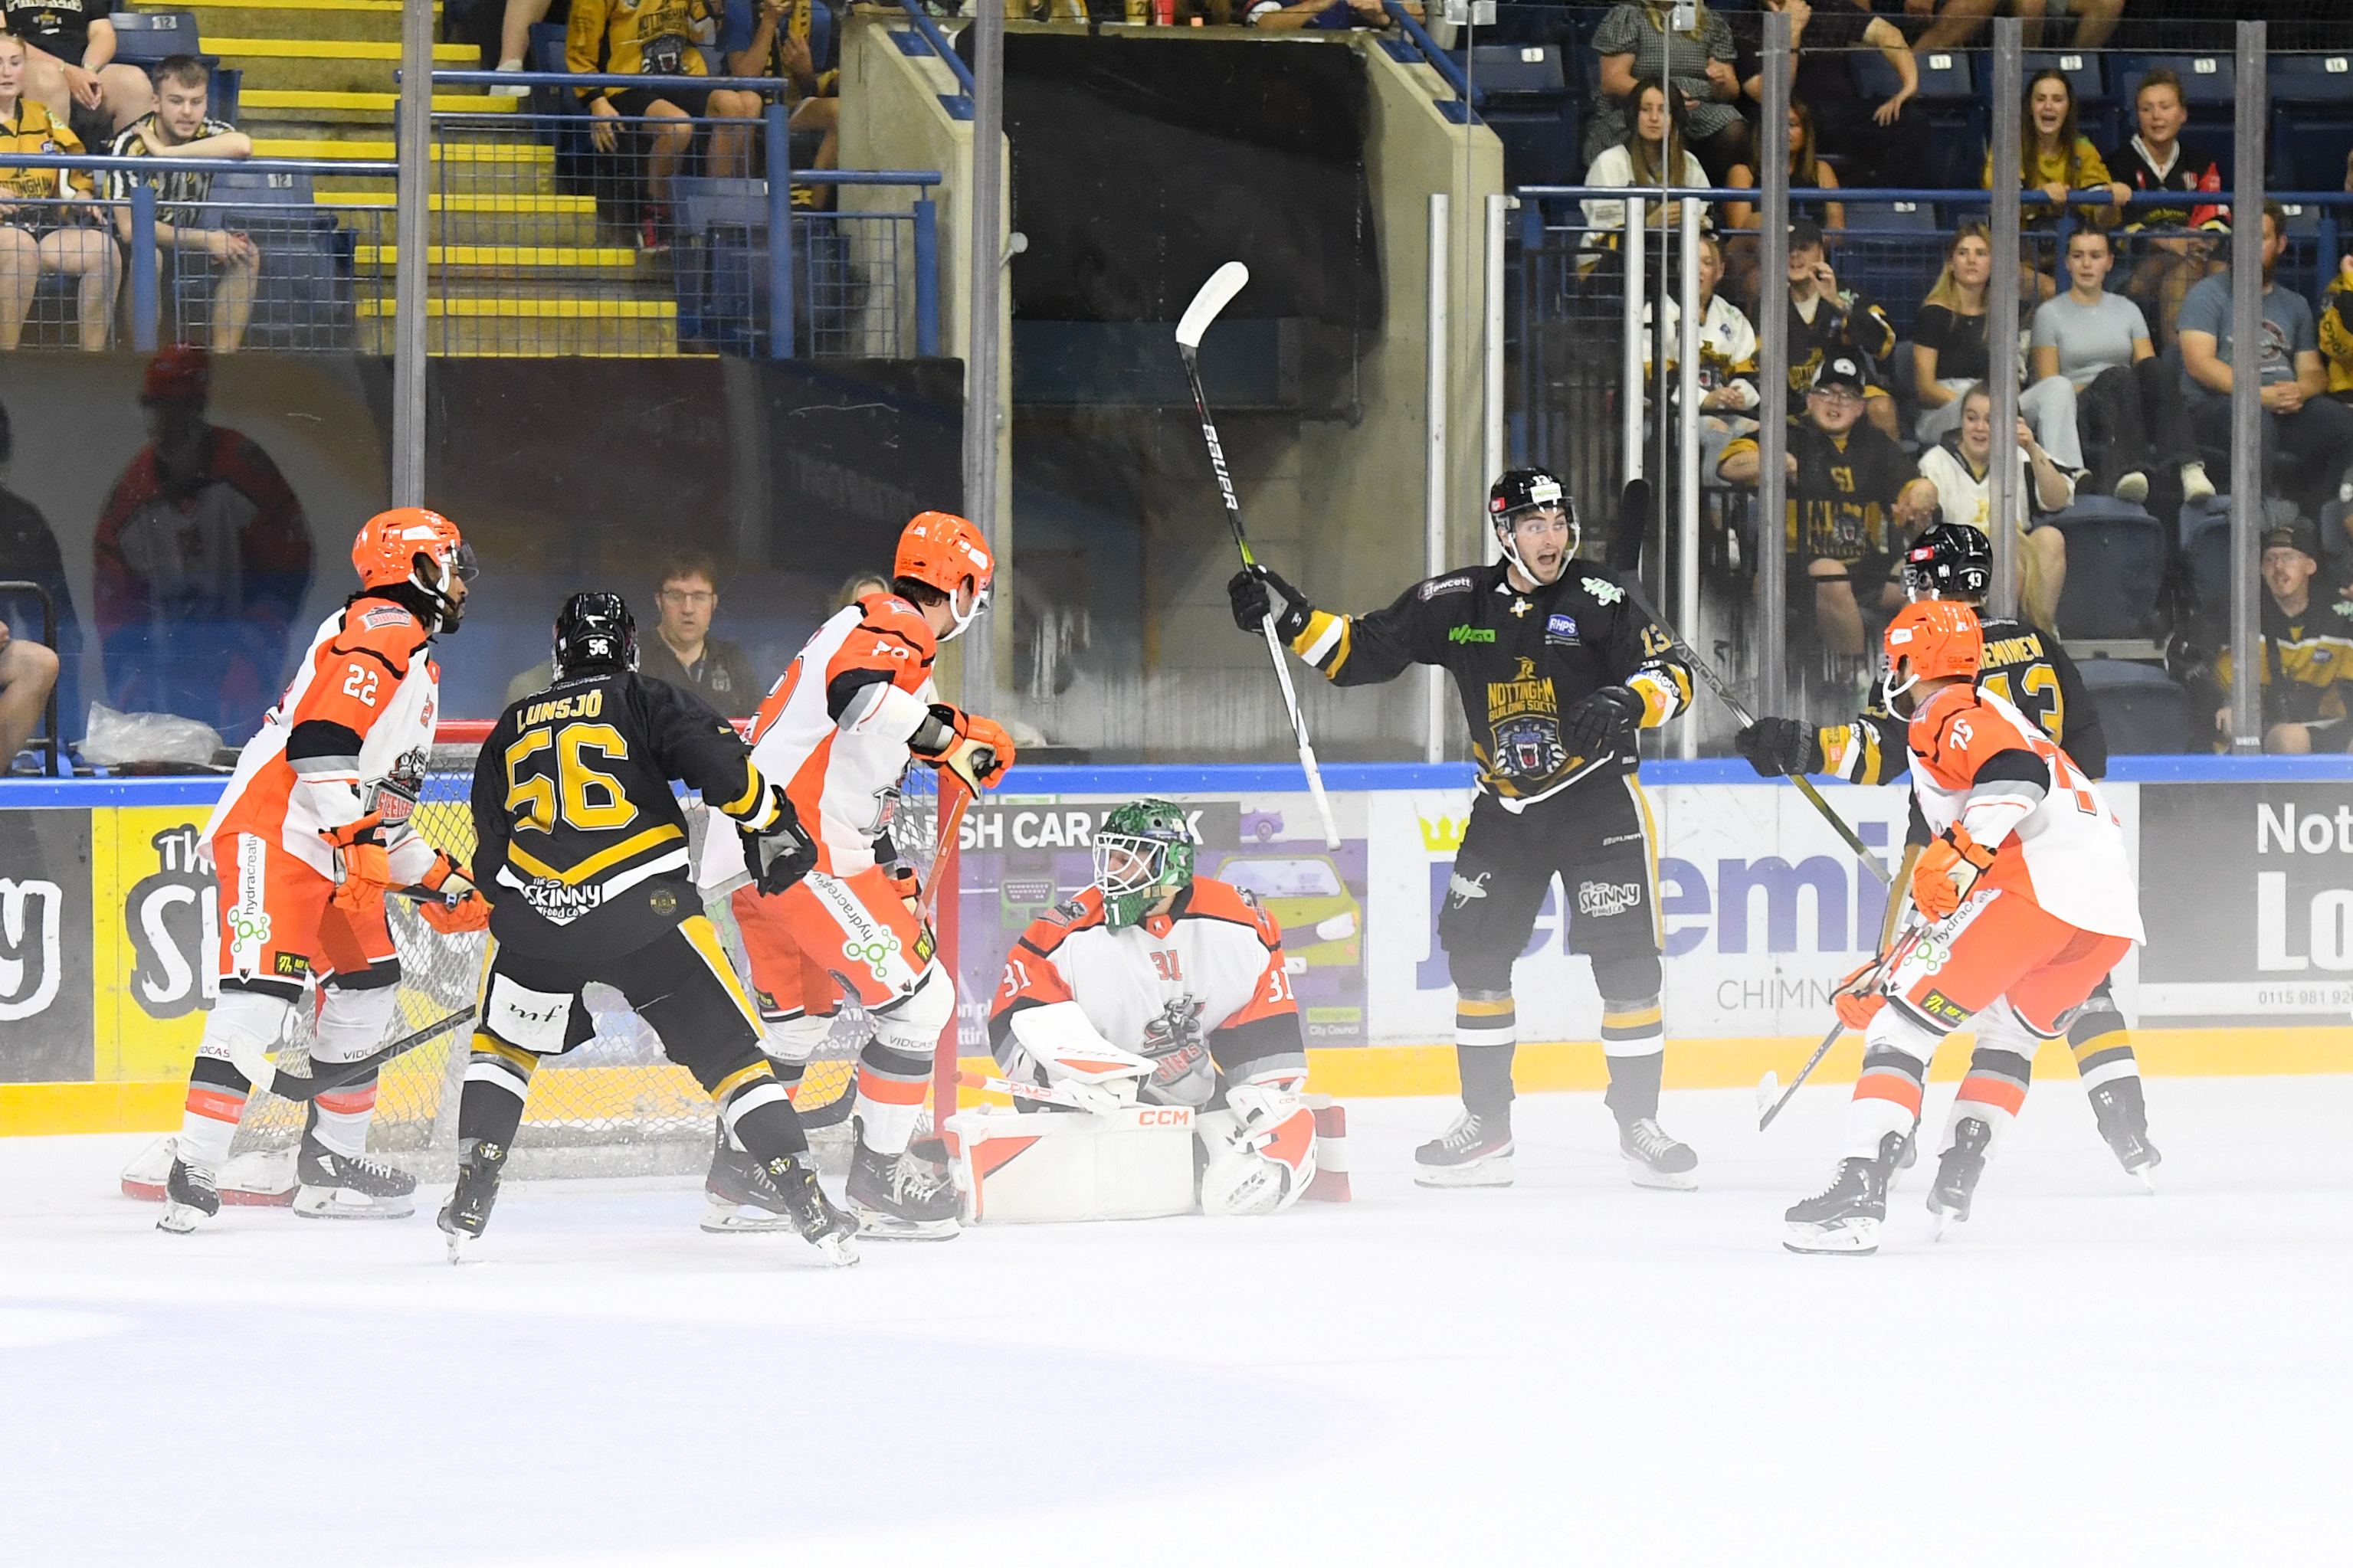 STEELERS NEXT AT THE MOTORPOINT ARENA Top Image